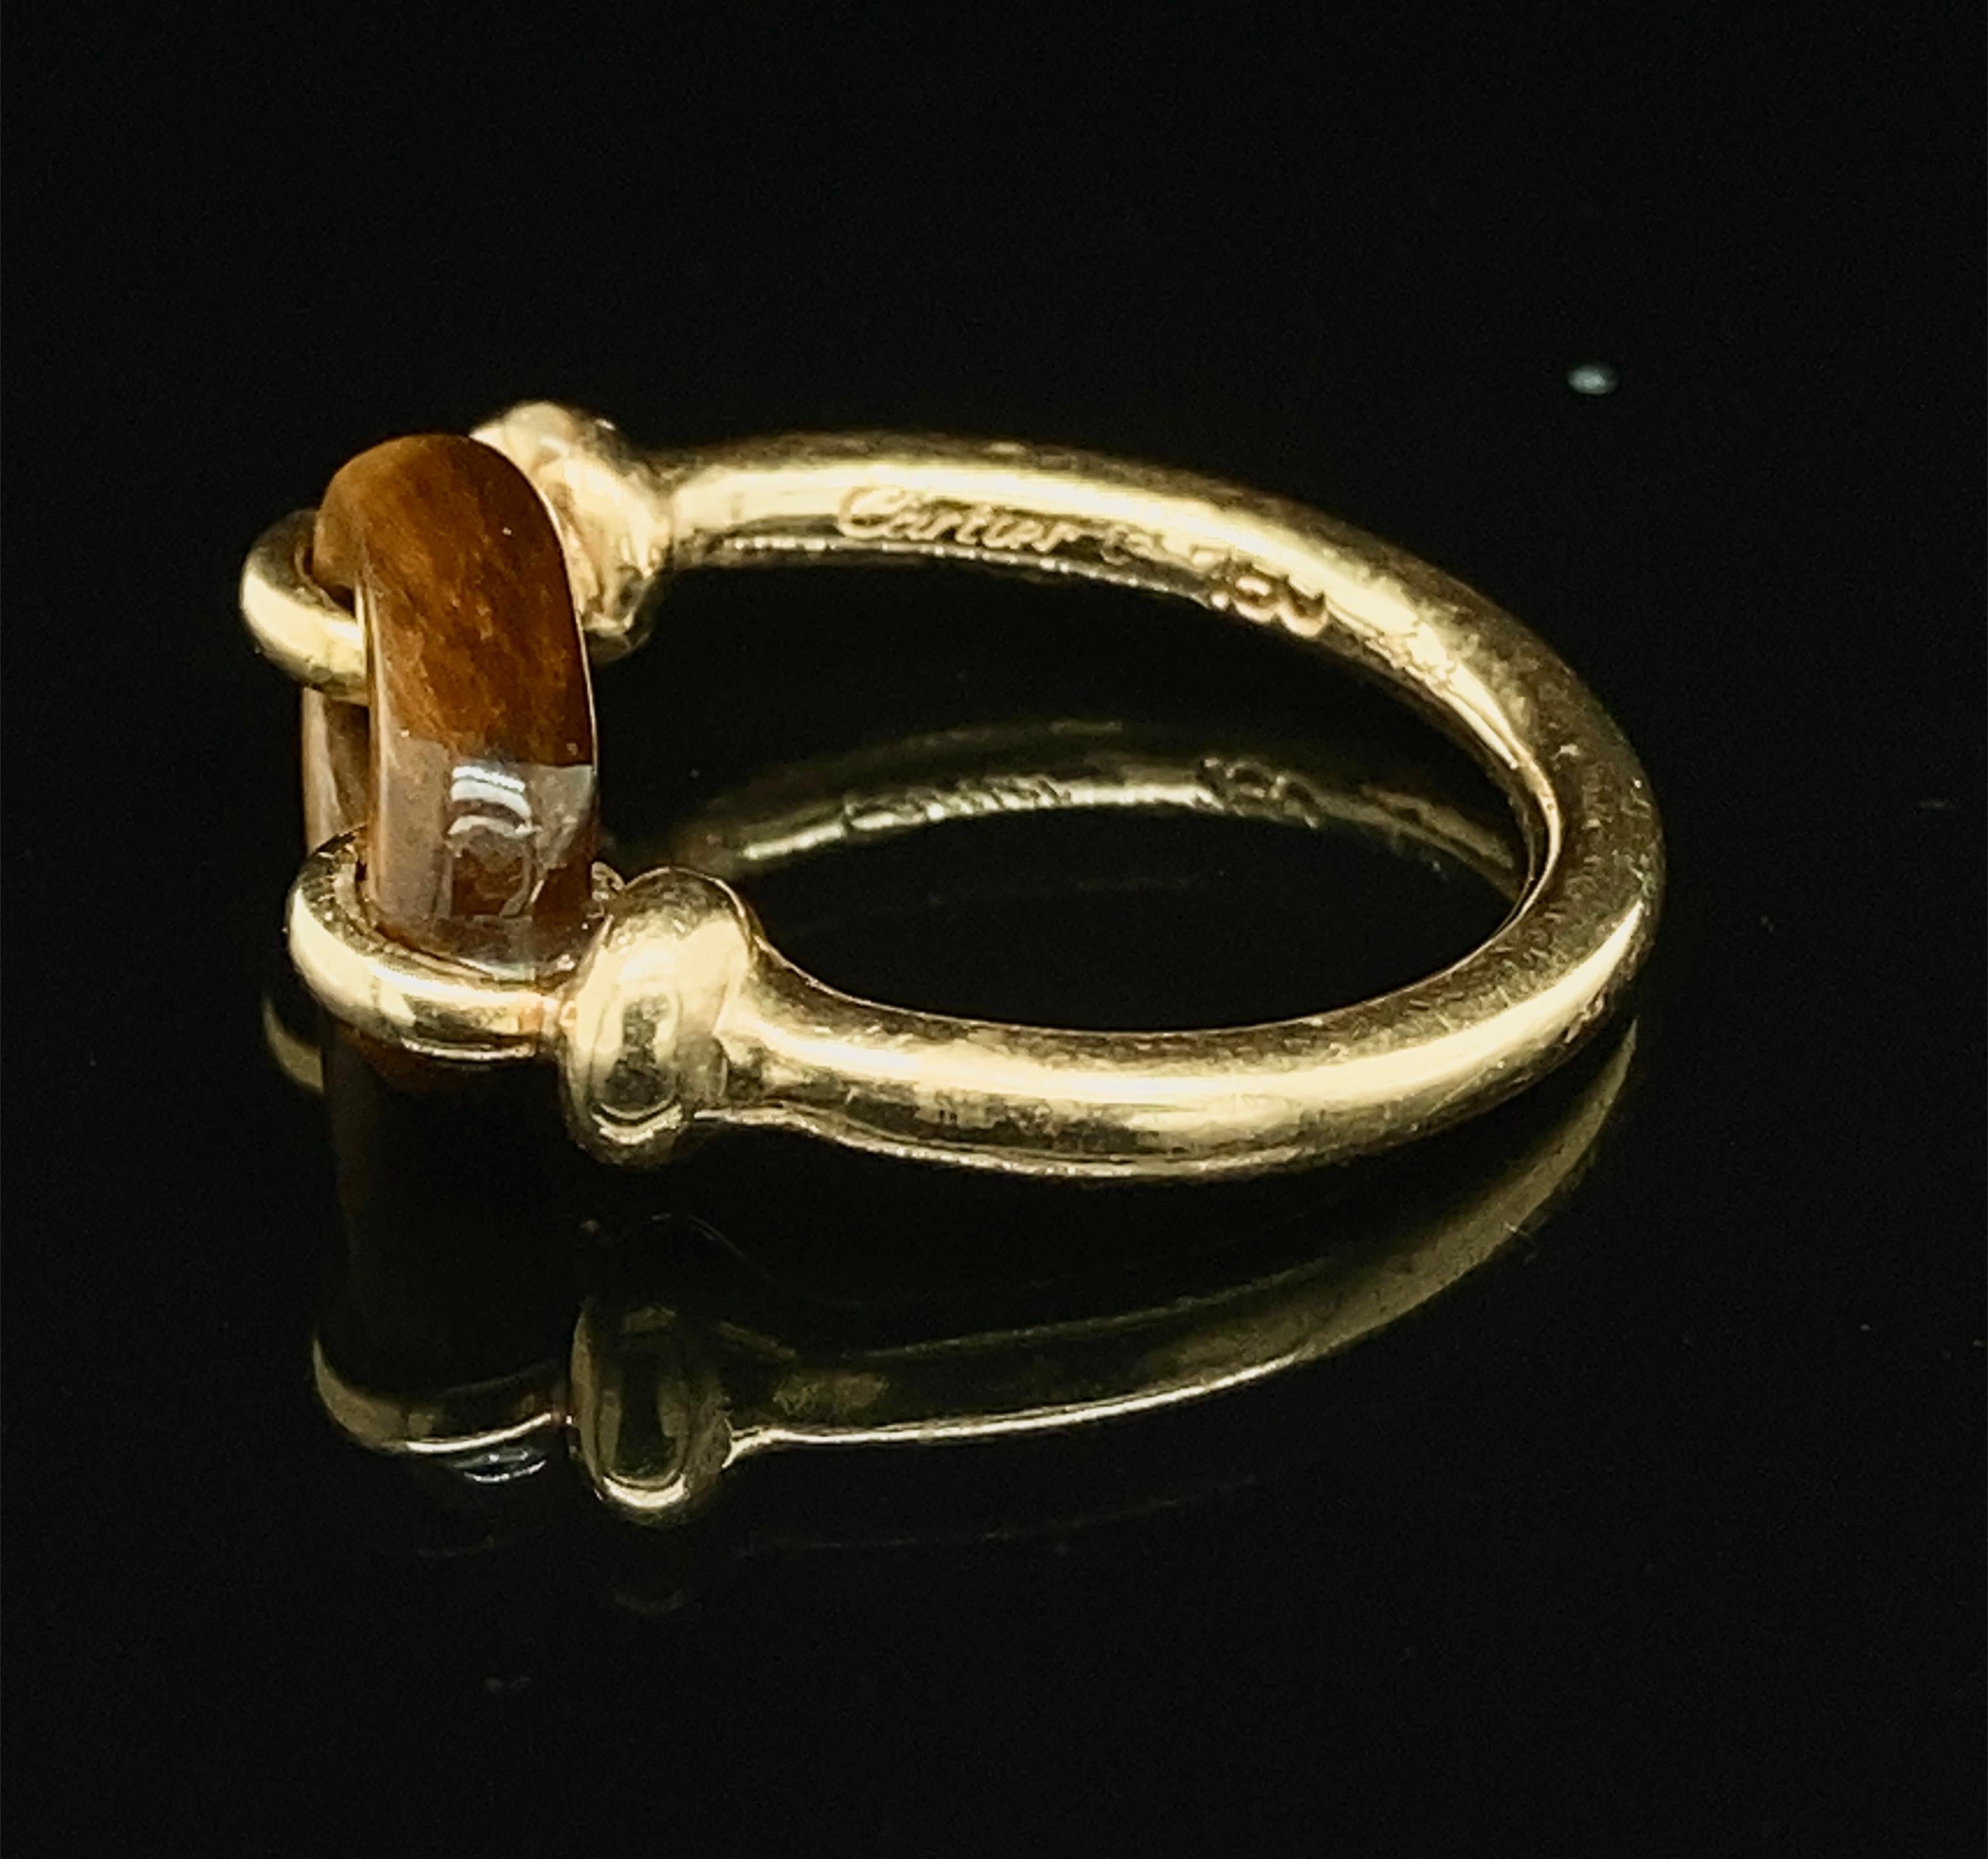 A delicate 18K gold Cartier ring, the tiger's eye carved in a loop, held within the gold ring, 
signed and numbered Cartier 54329 and marked 750, 
ring size 4 3/4, I,
4 g.
In good overall condition with beautiful shimmer to the tiger's eye.
